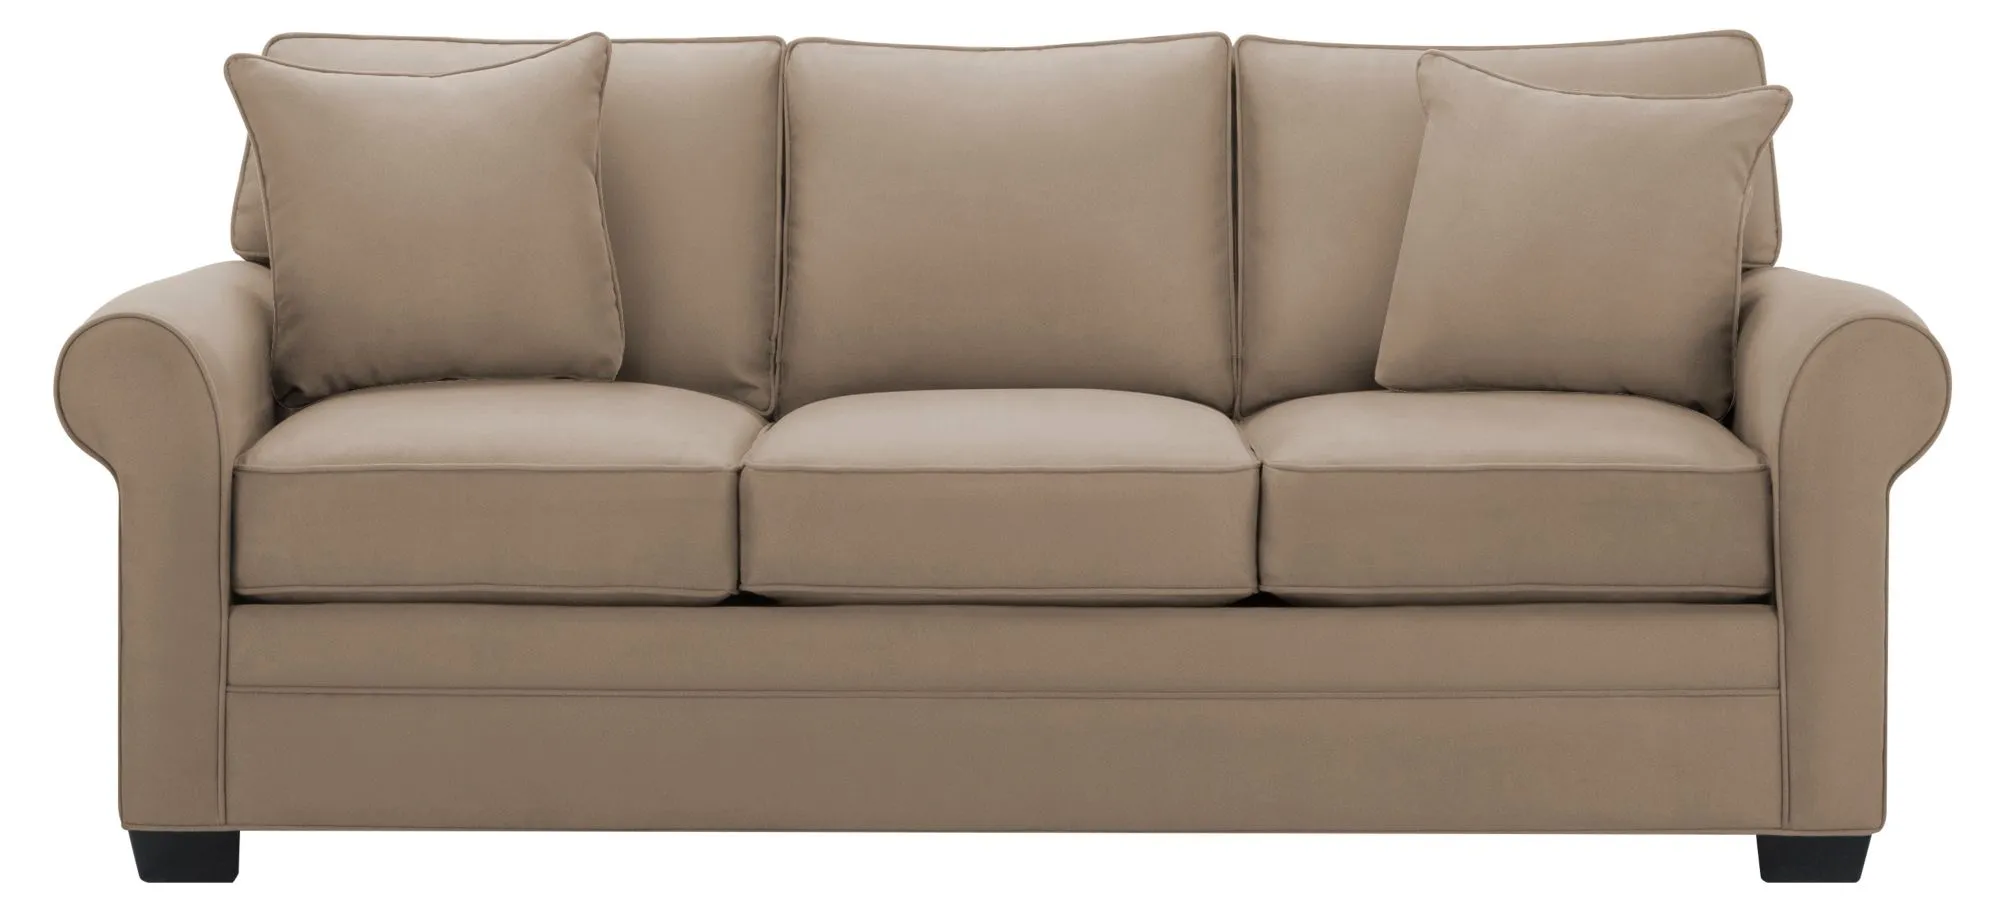 Glendora Sofa in Suede So Soft Mineral by H.M. Richards